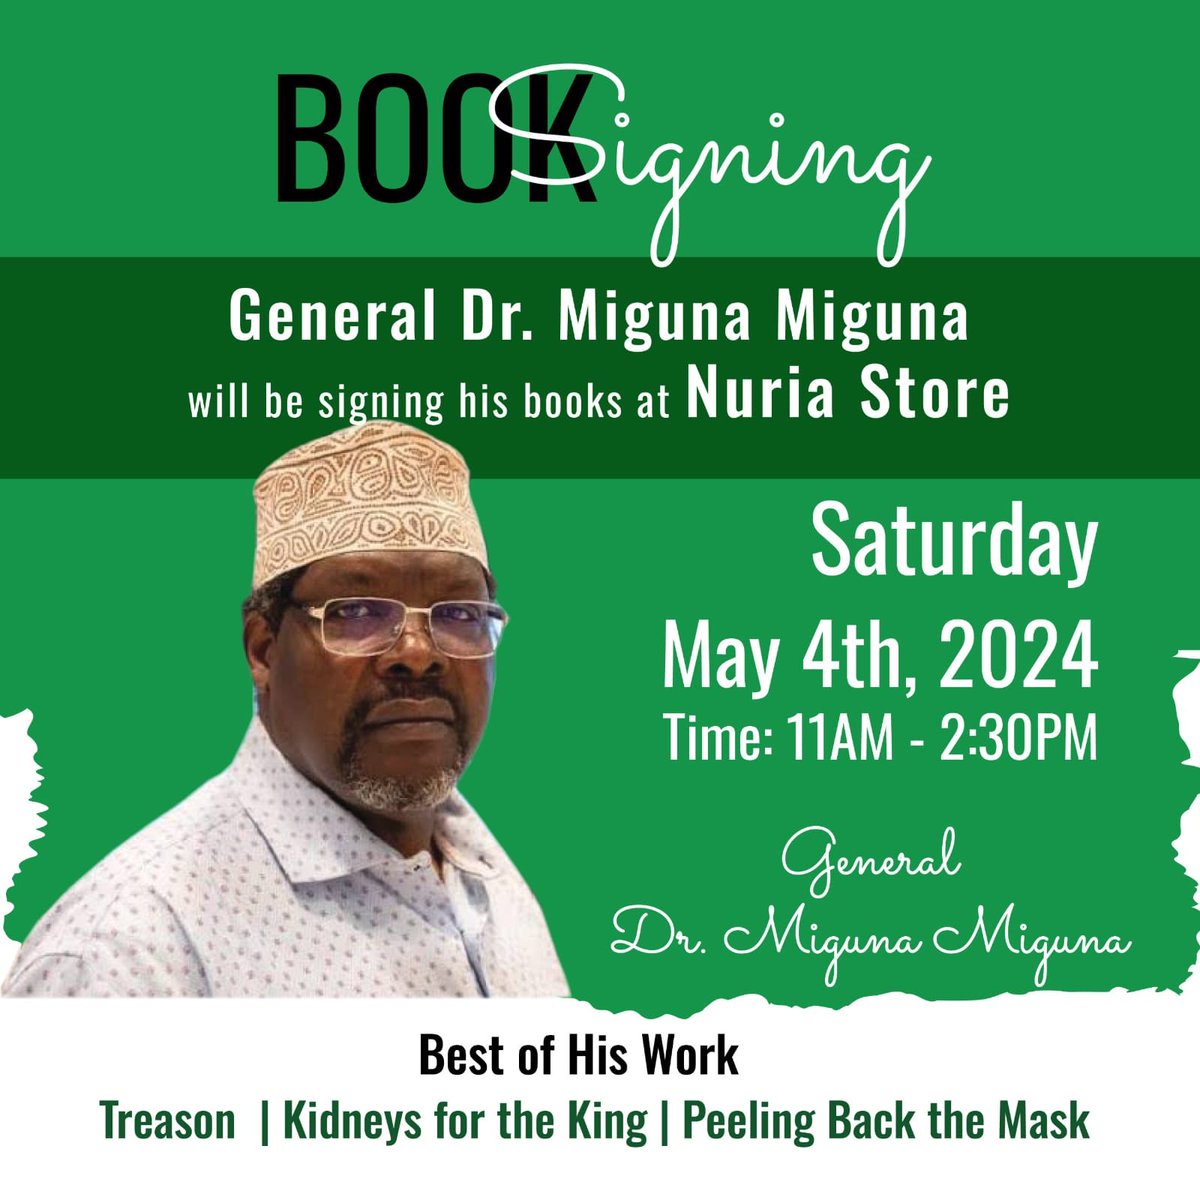 HUGE: Come and meet or see the General Book signing event at Nuria Store on 4th May 2024. See poster for more details. #EkoroiReview @MigunaMiguna @NuriaStore